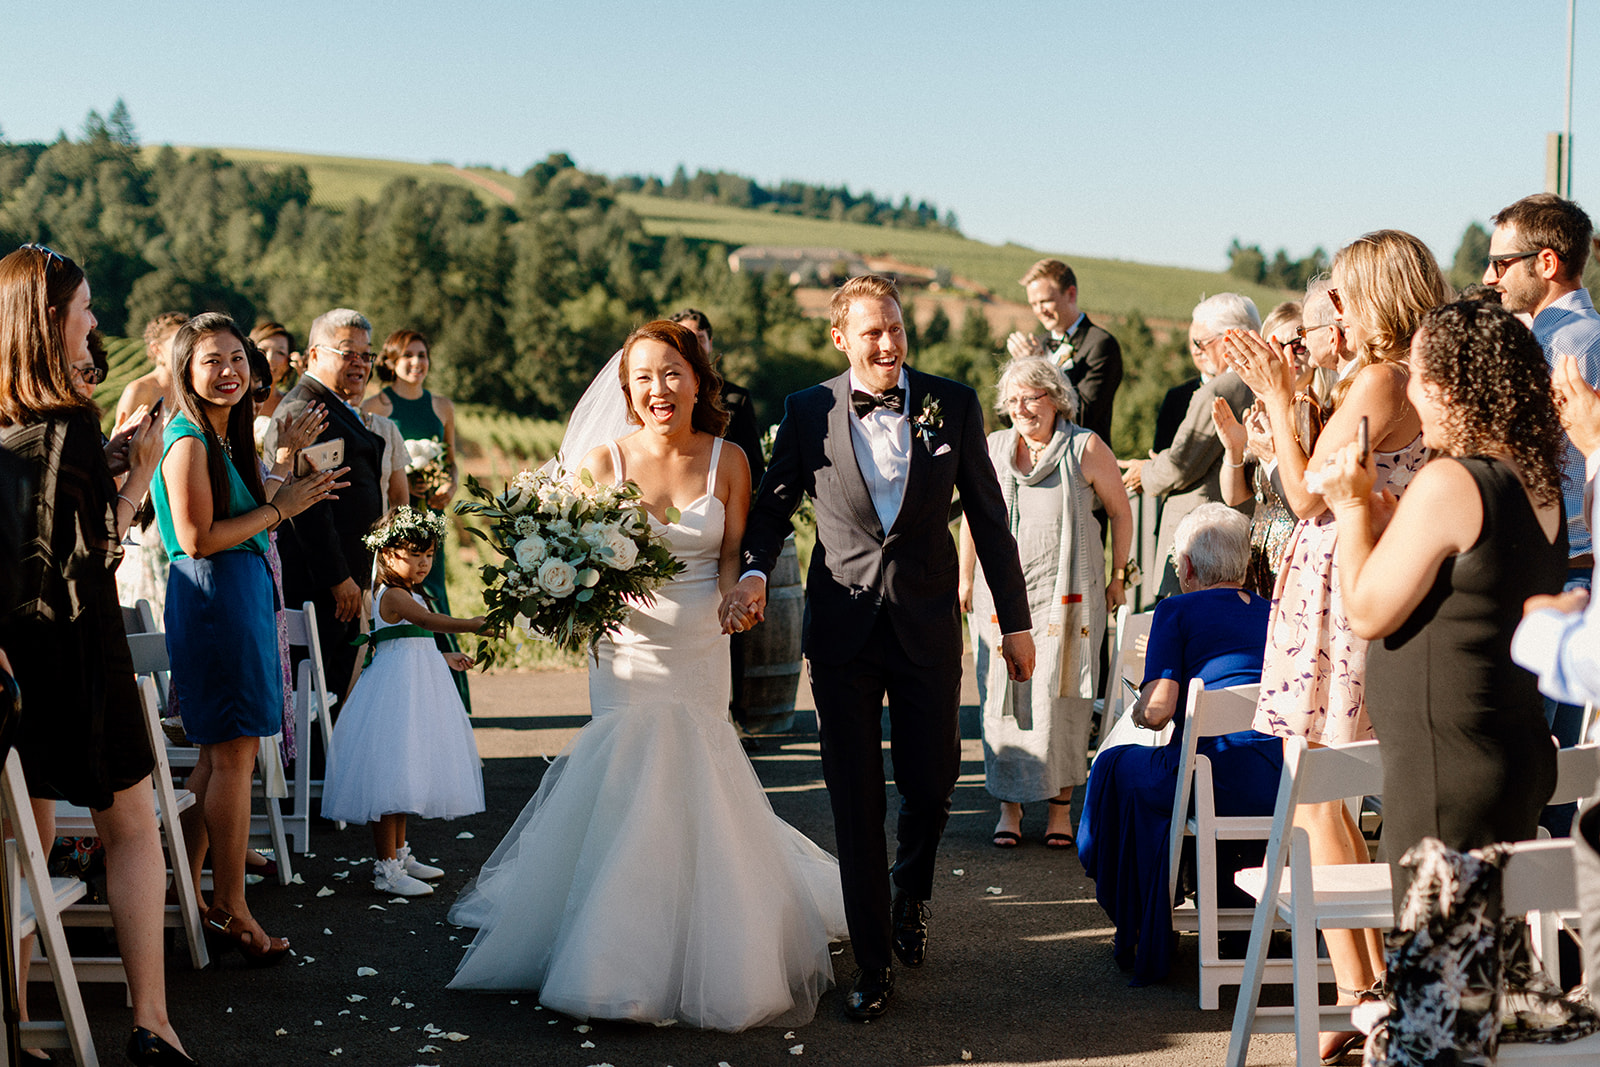 A bride and groom walking down the aisle at their Sokol Blosser winery wedding ceremony.